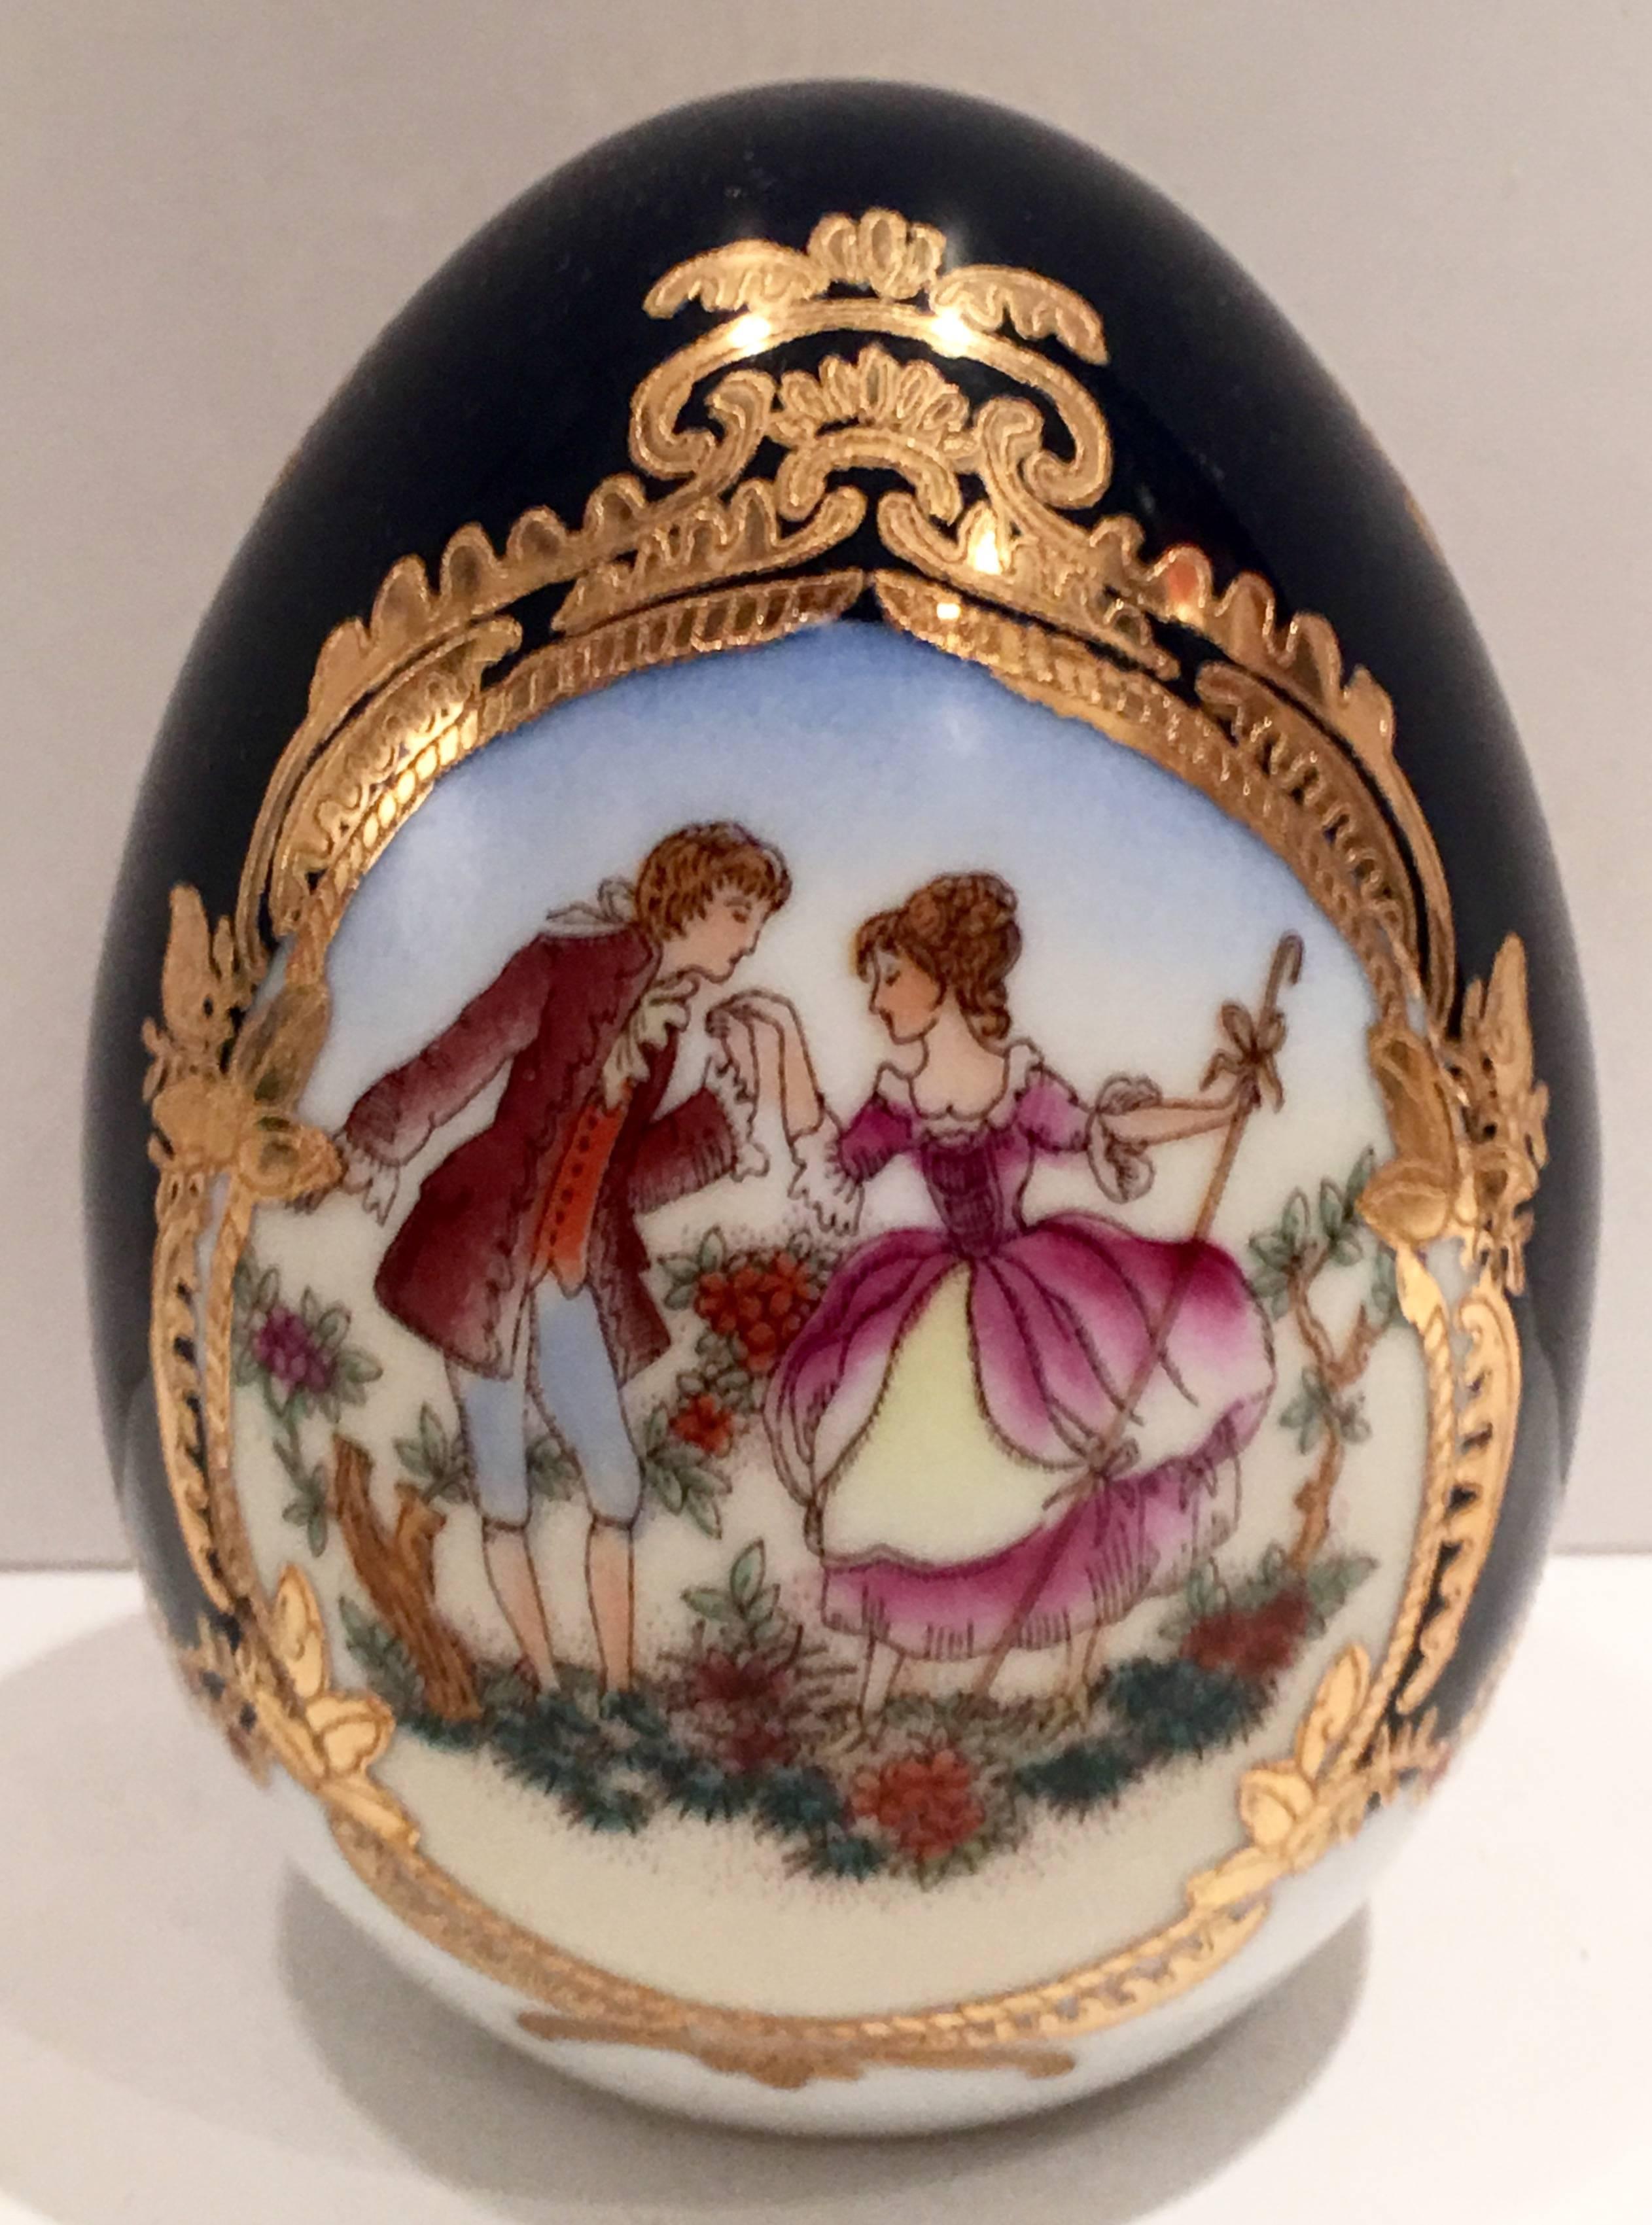 Mid-Century lovely cobalt and 22-karat gold detail double sided courting couple motif egg sculpture. Signed at the bottom in gold, L.F. Fine Porcelain Limoges-P.R.C.